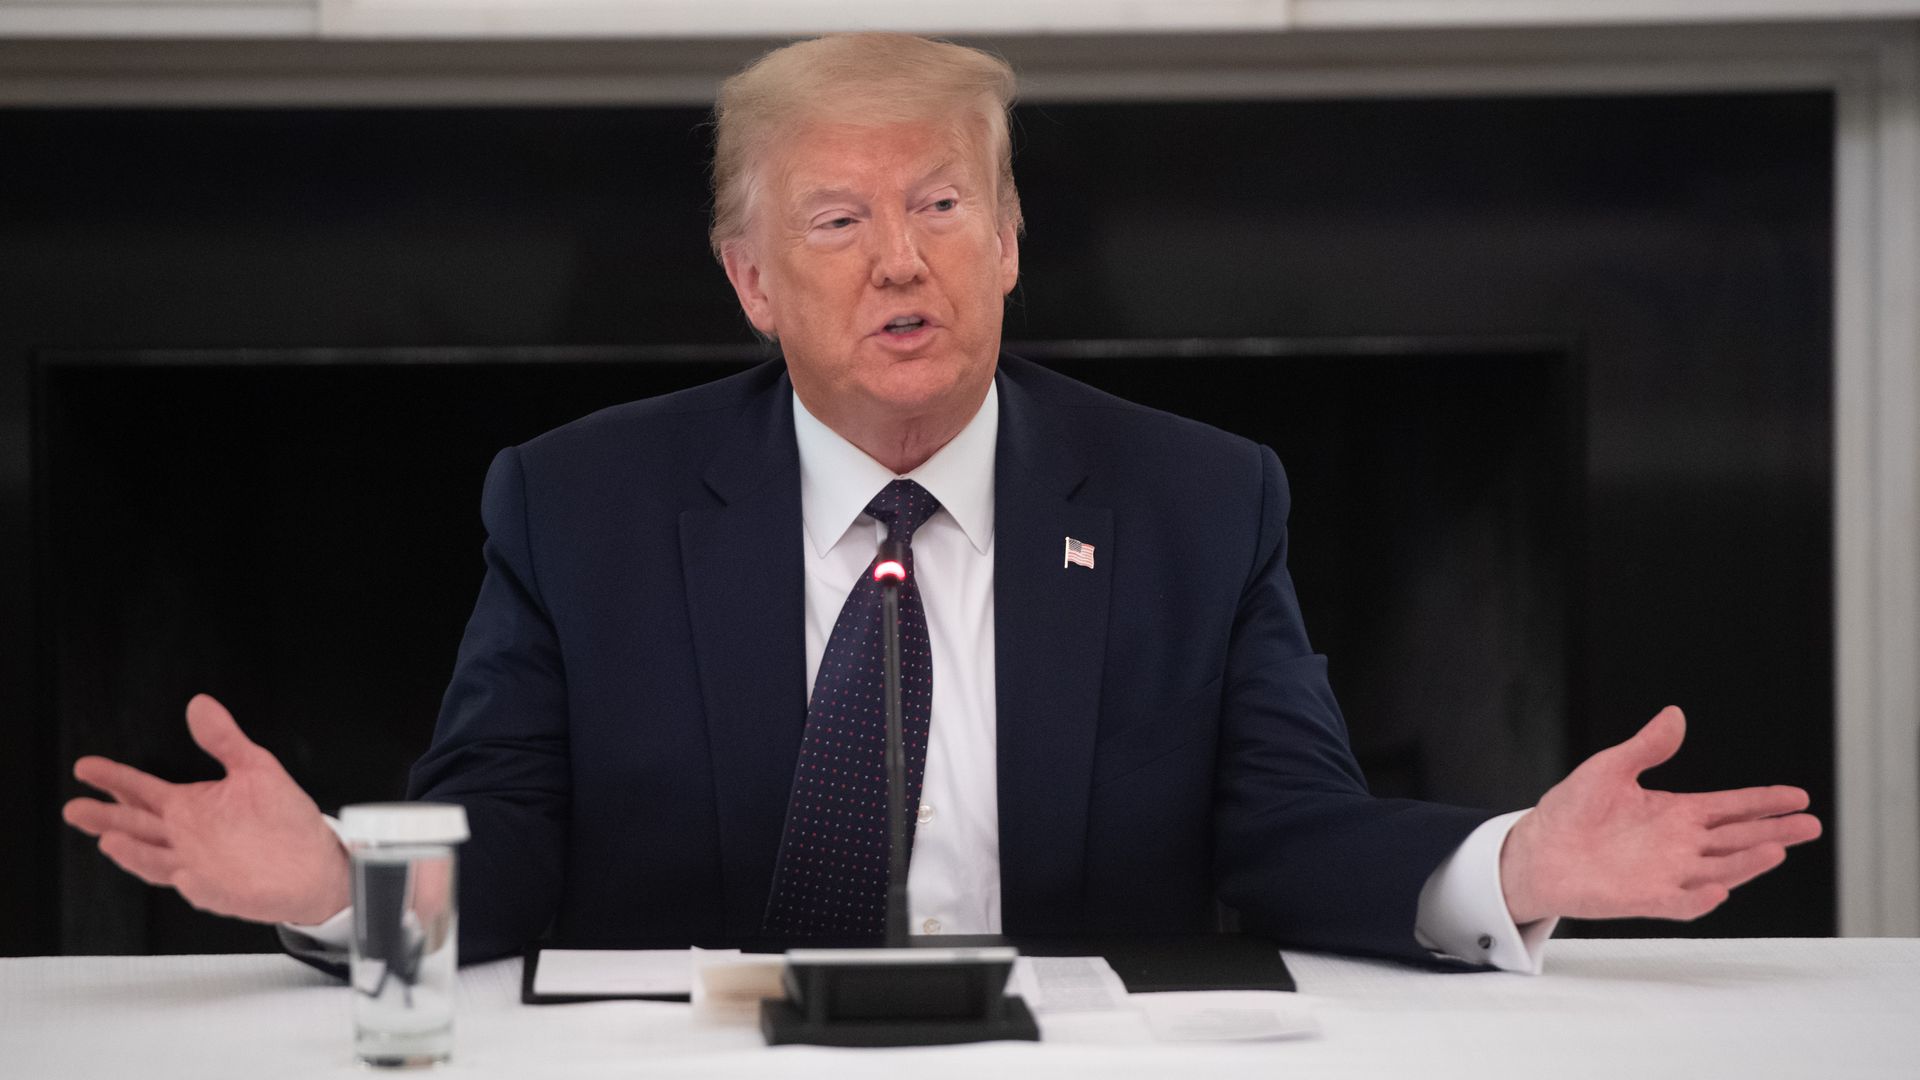 President Trump hosts a roundtable discussion with law enforcement officials on police and community relations